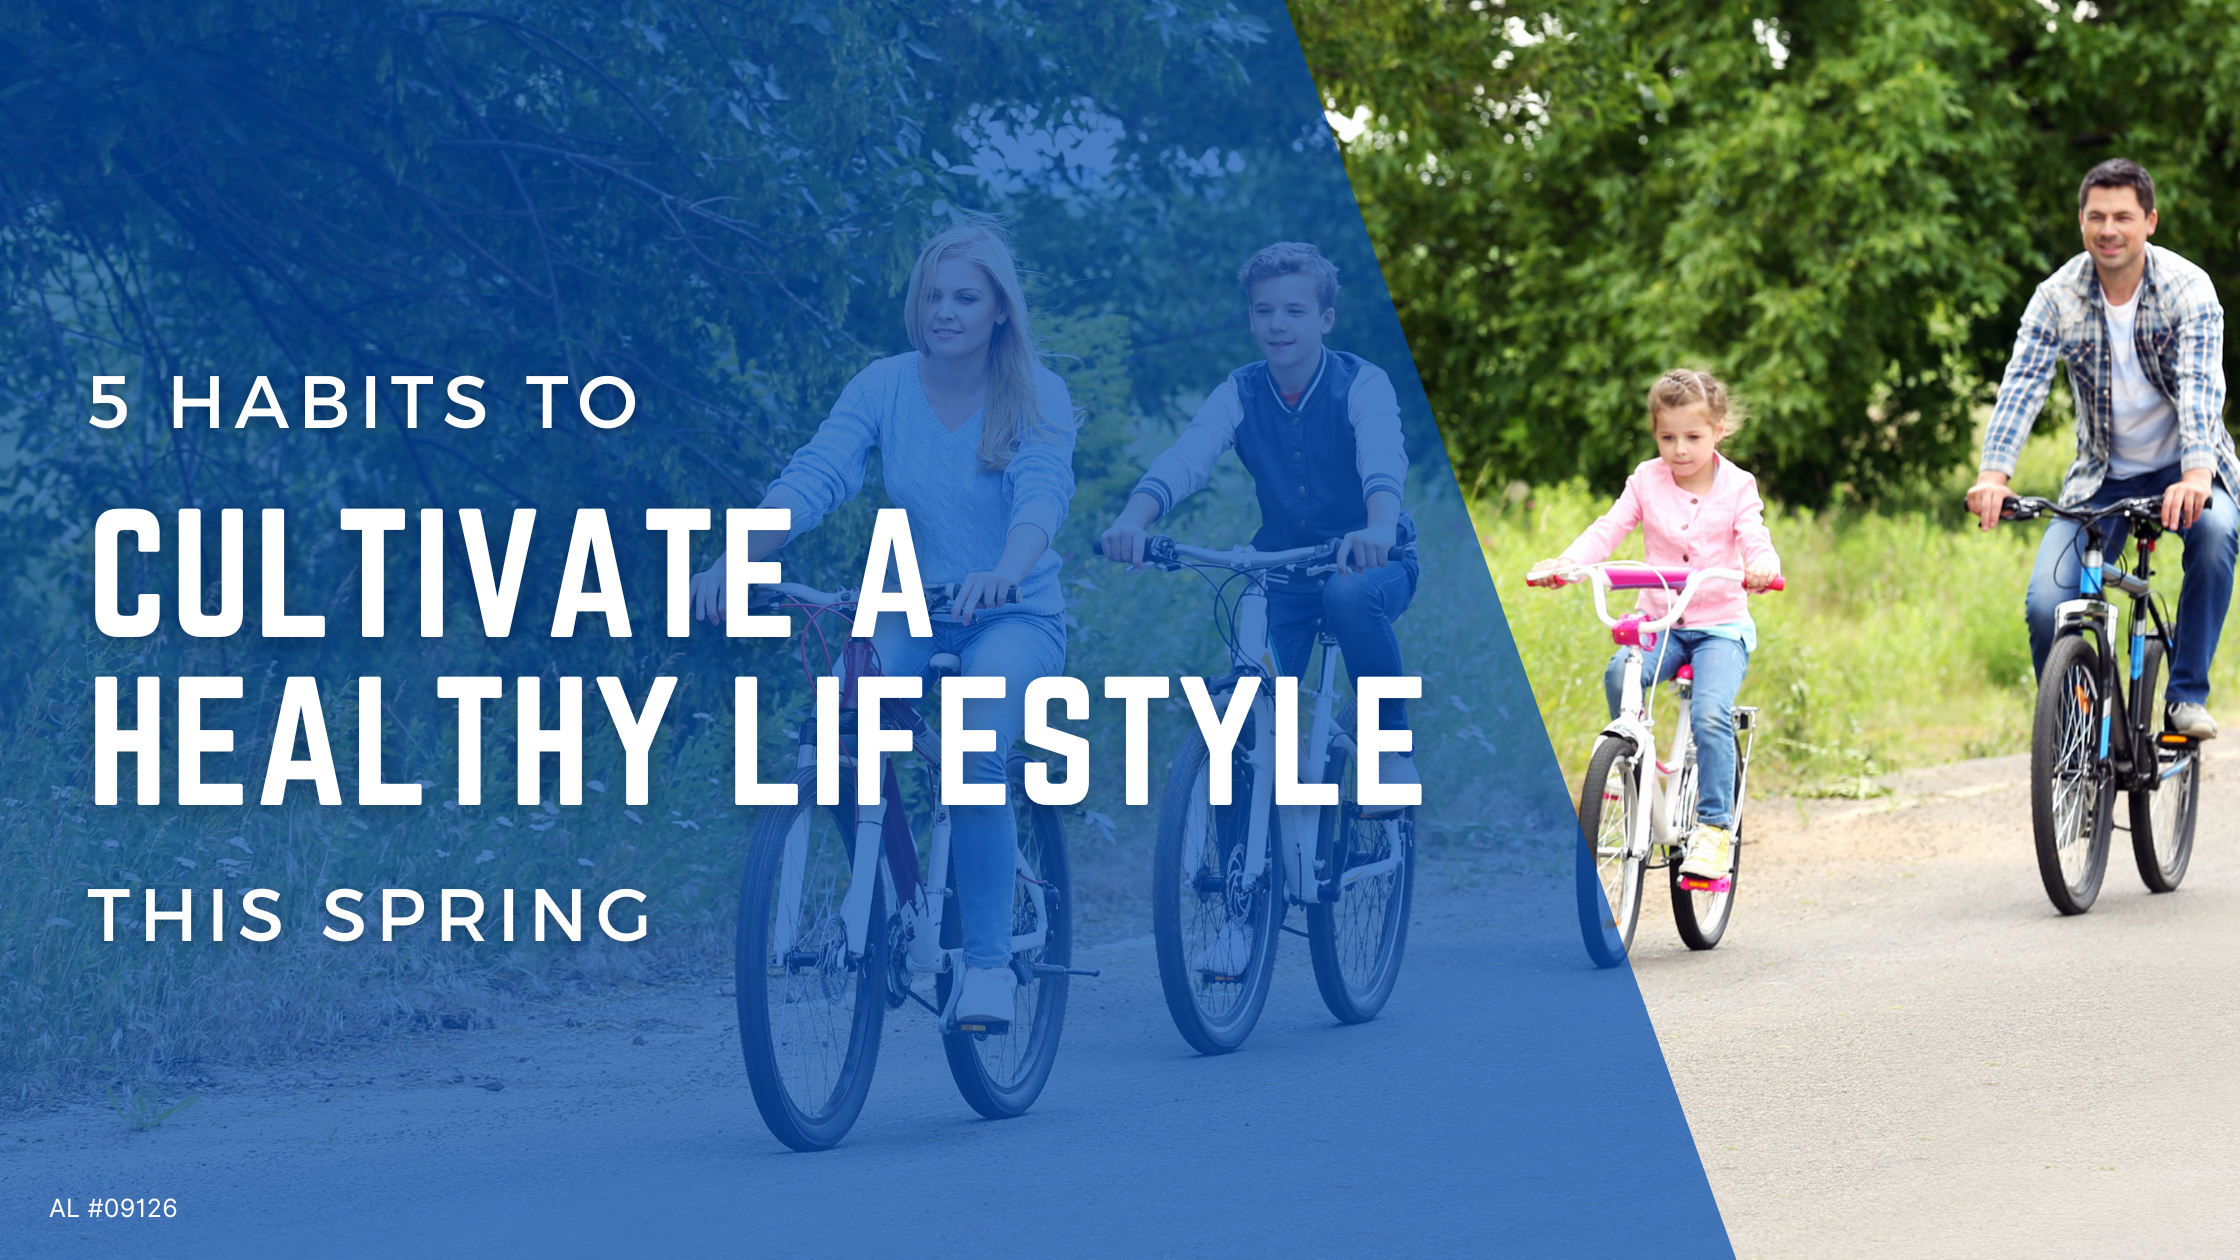 5 Habits to Cultivate A Healthy Lifestyle This Spring